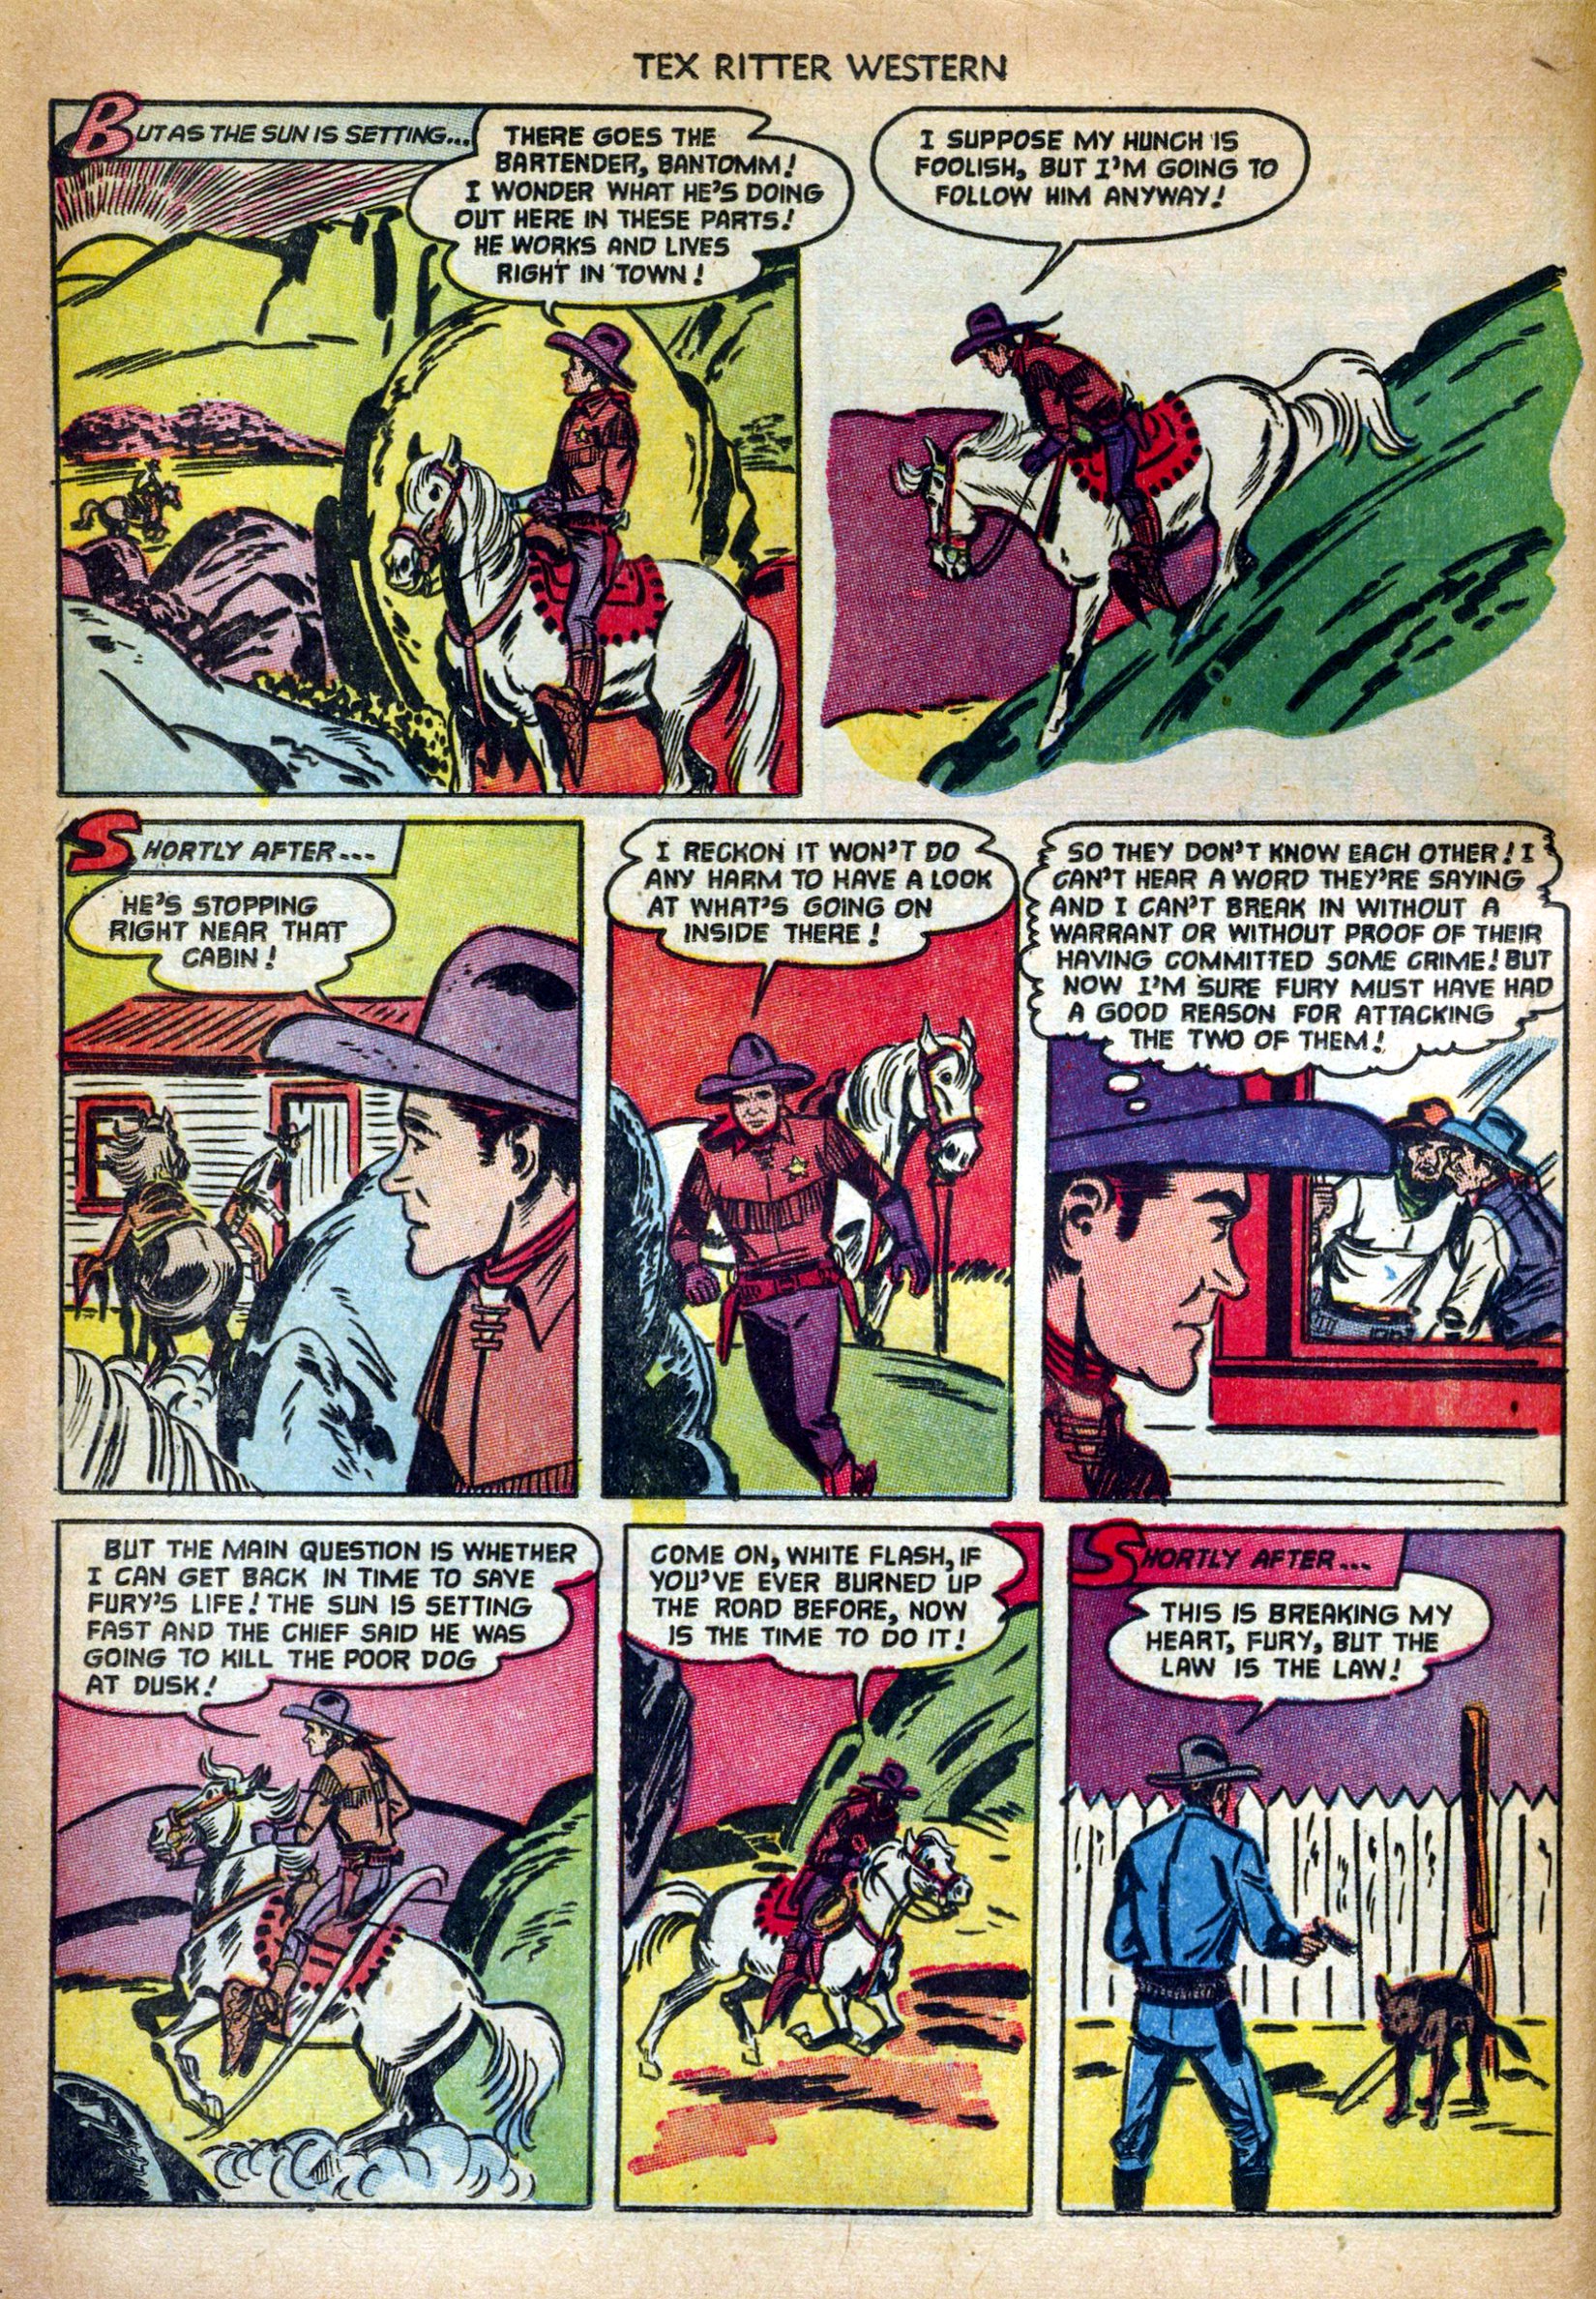 Read online Tex Ritter Western comic -  Issue #14 - 8